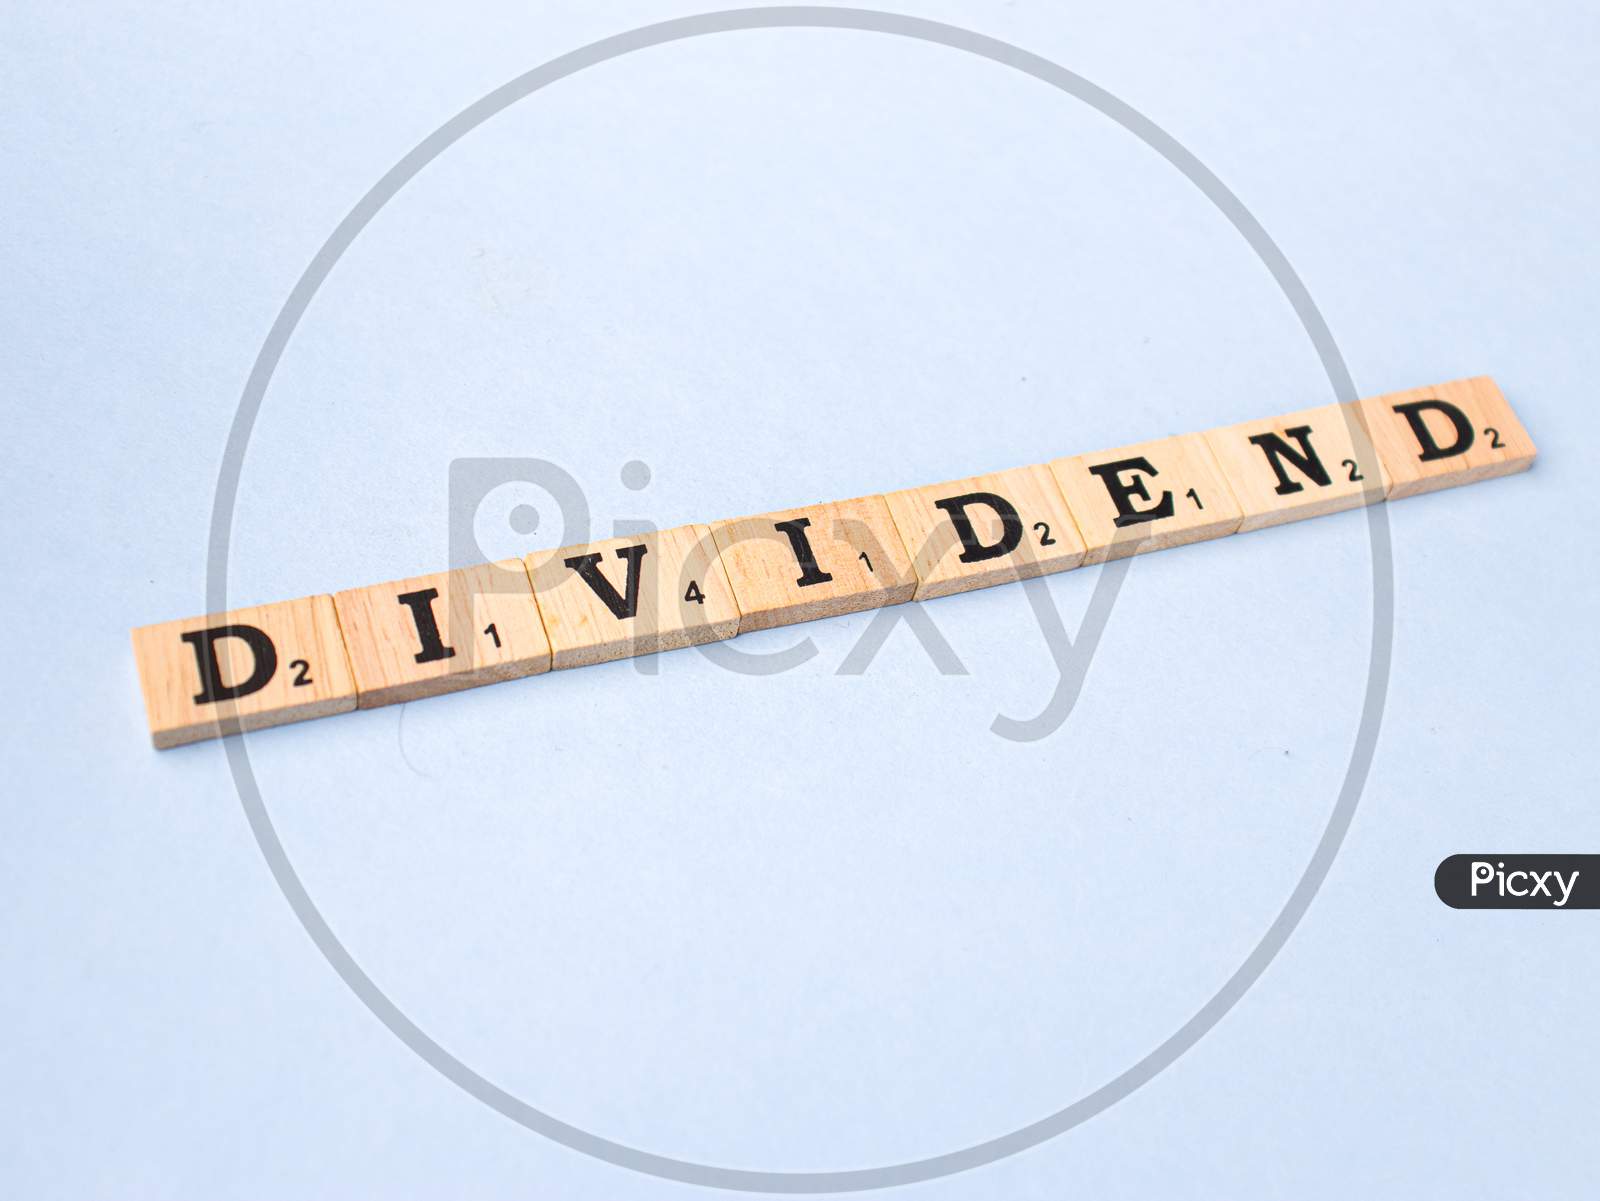 Assam, india - March 30, 2021 : Word DIVIDEND written on wooden cubes stock image.